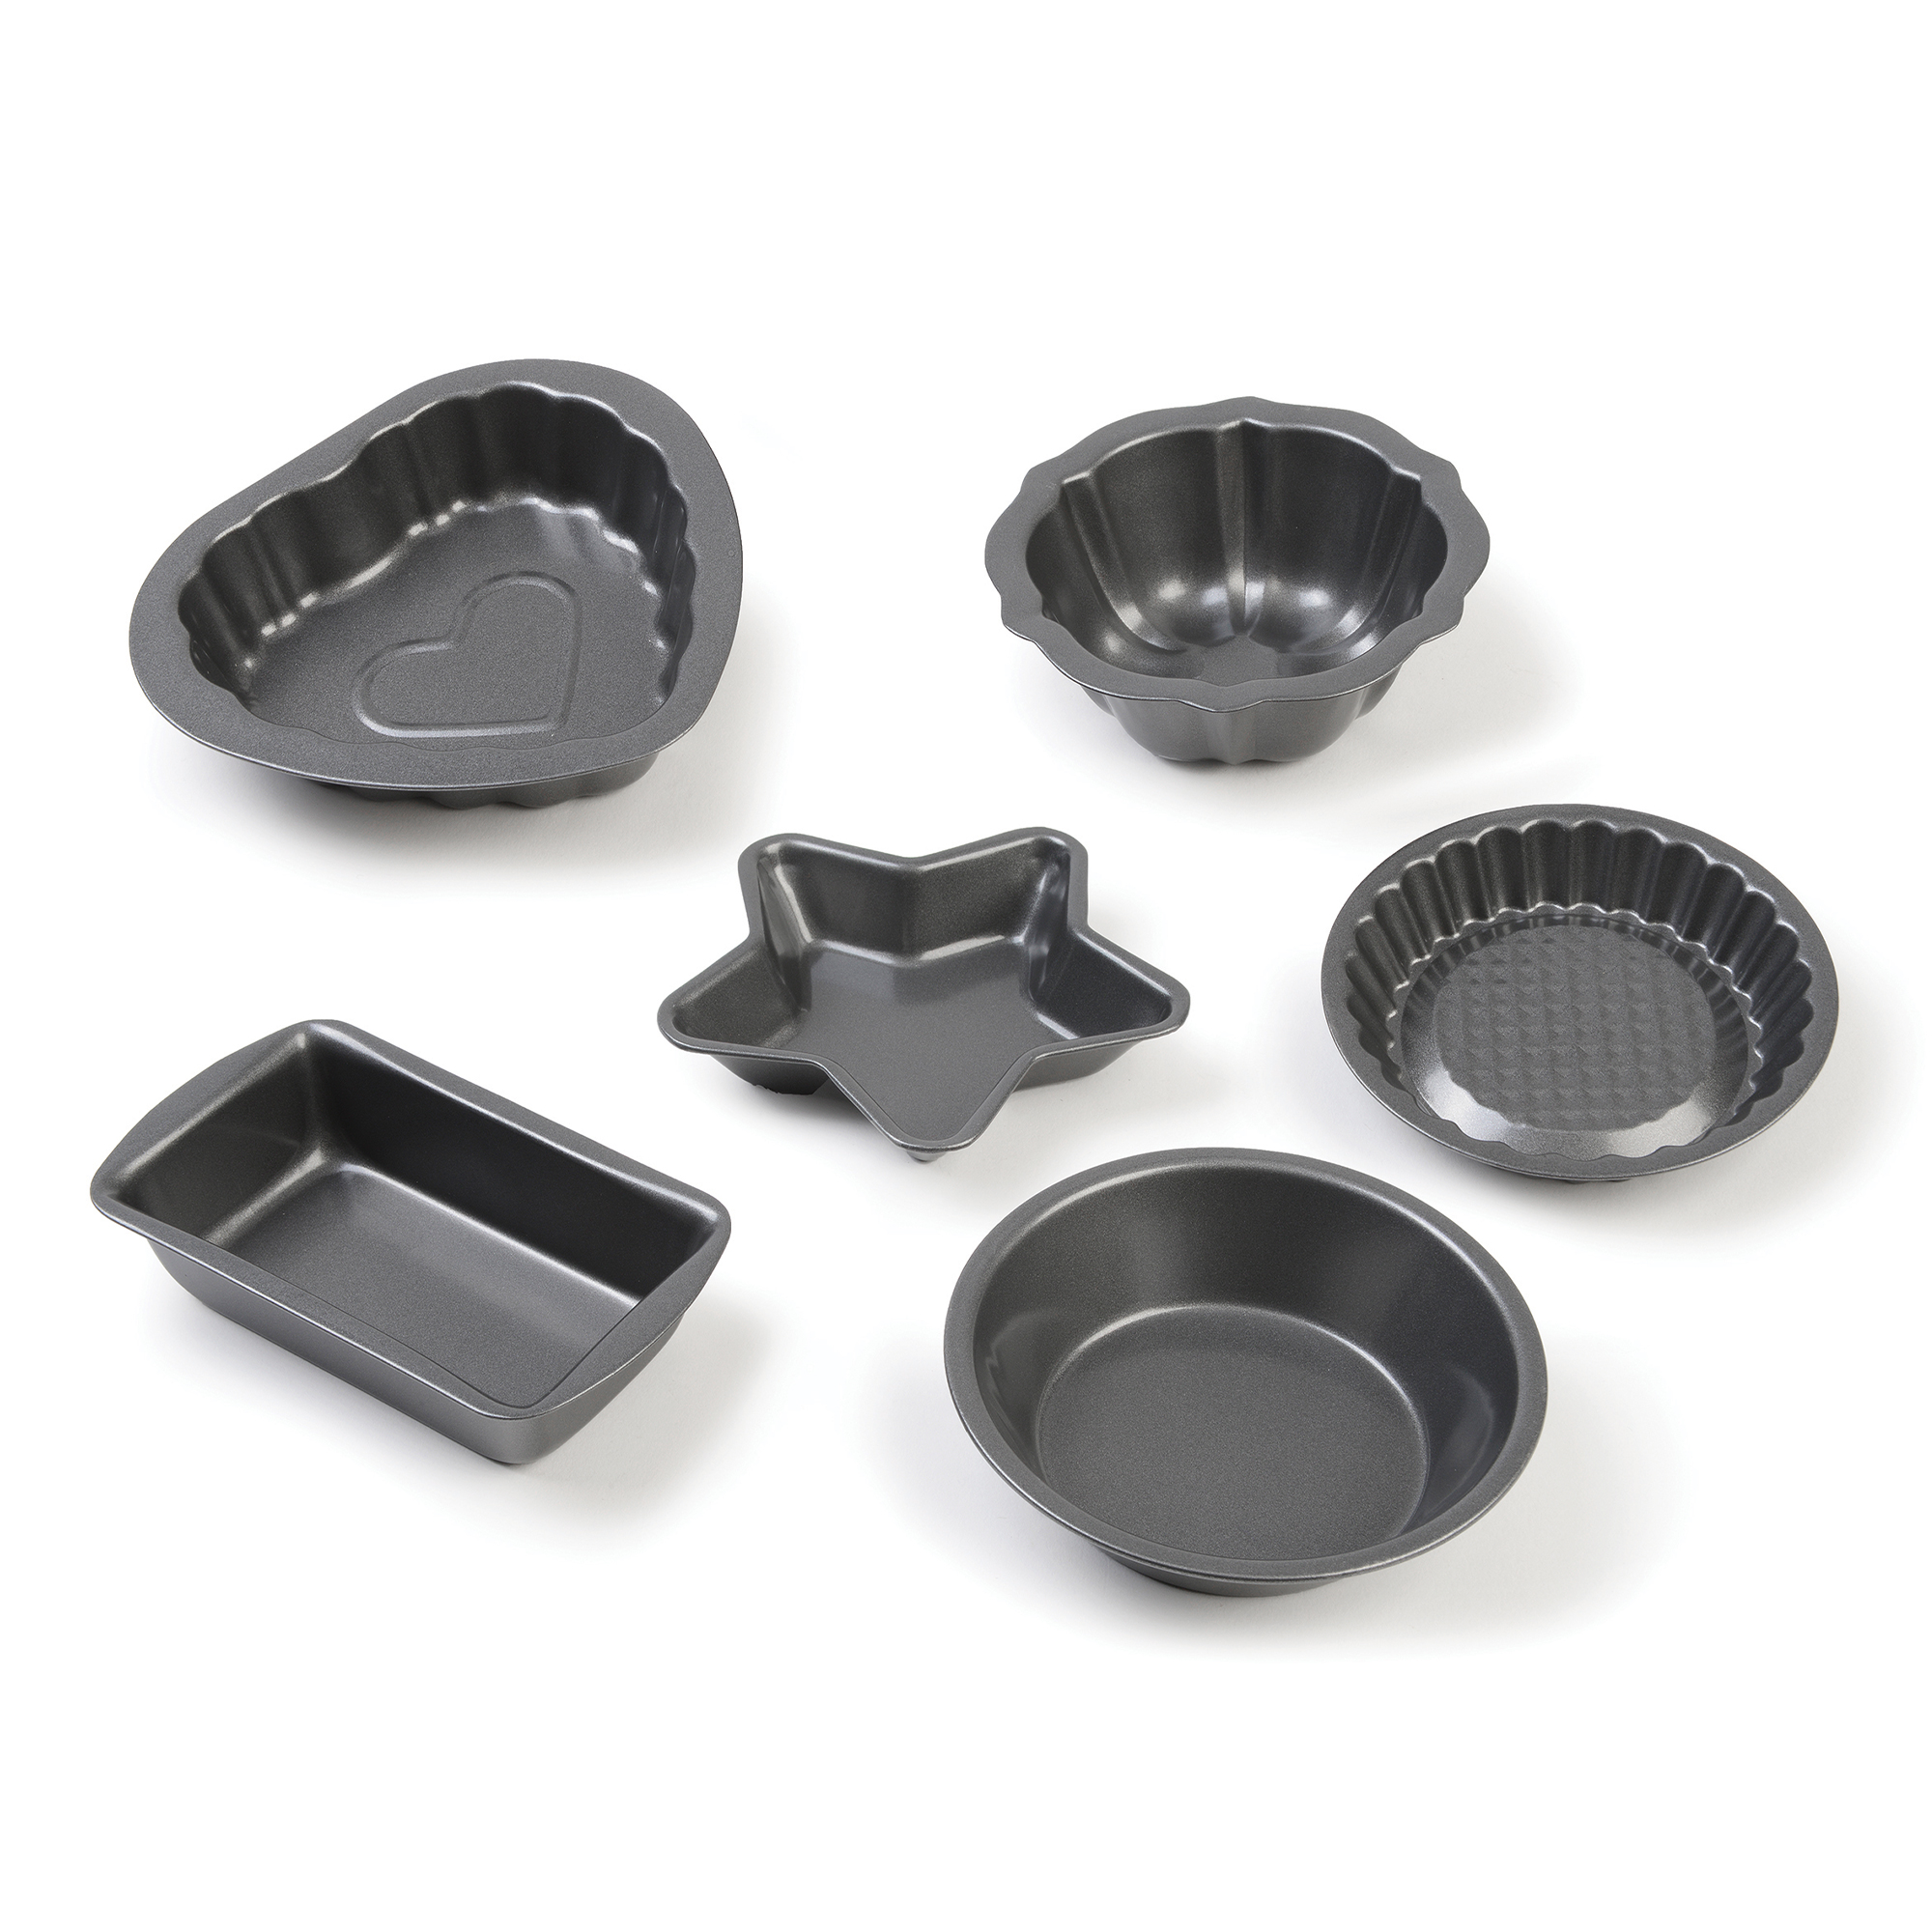 https://www.earlyexcellence.shop/images/product/source/DO31-Set-of-Mini-Baking-Tins-2023-001-large.jpg?t=1676974890